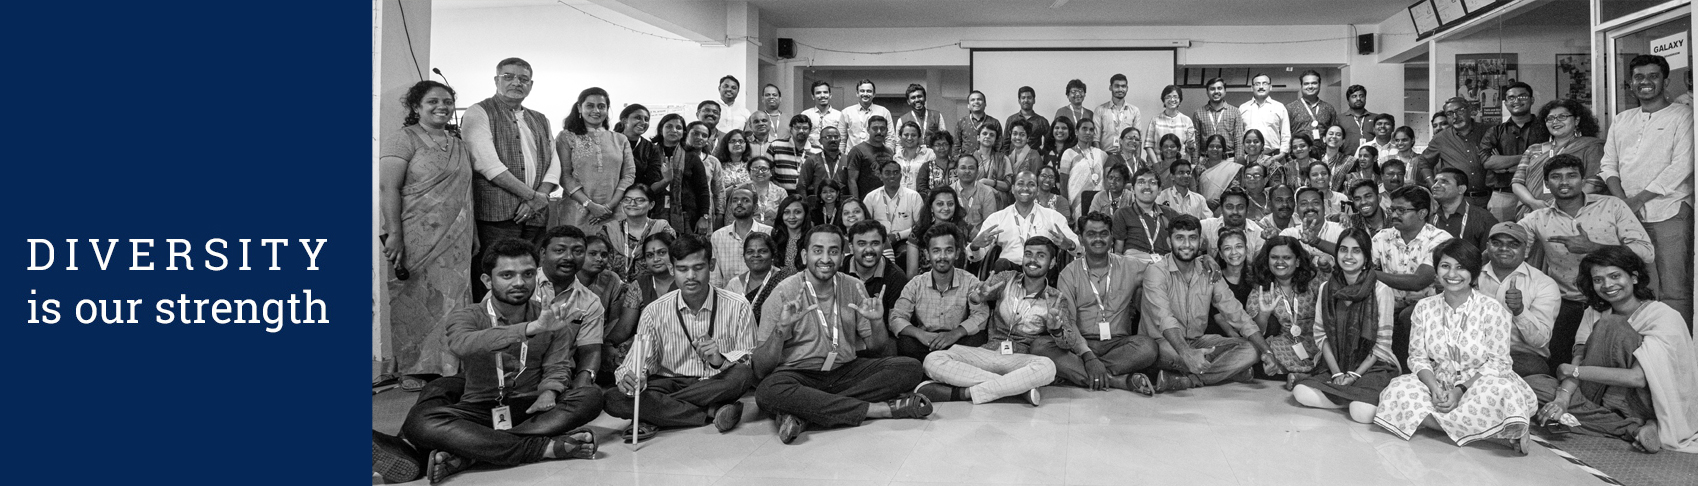 Diversity is our strength - Enable India Staff photo